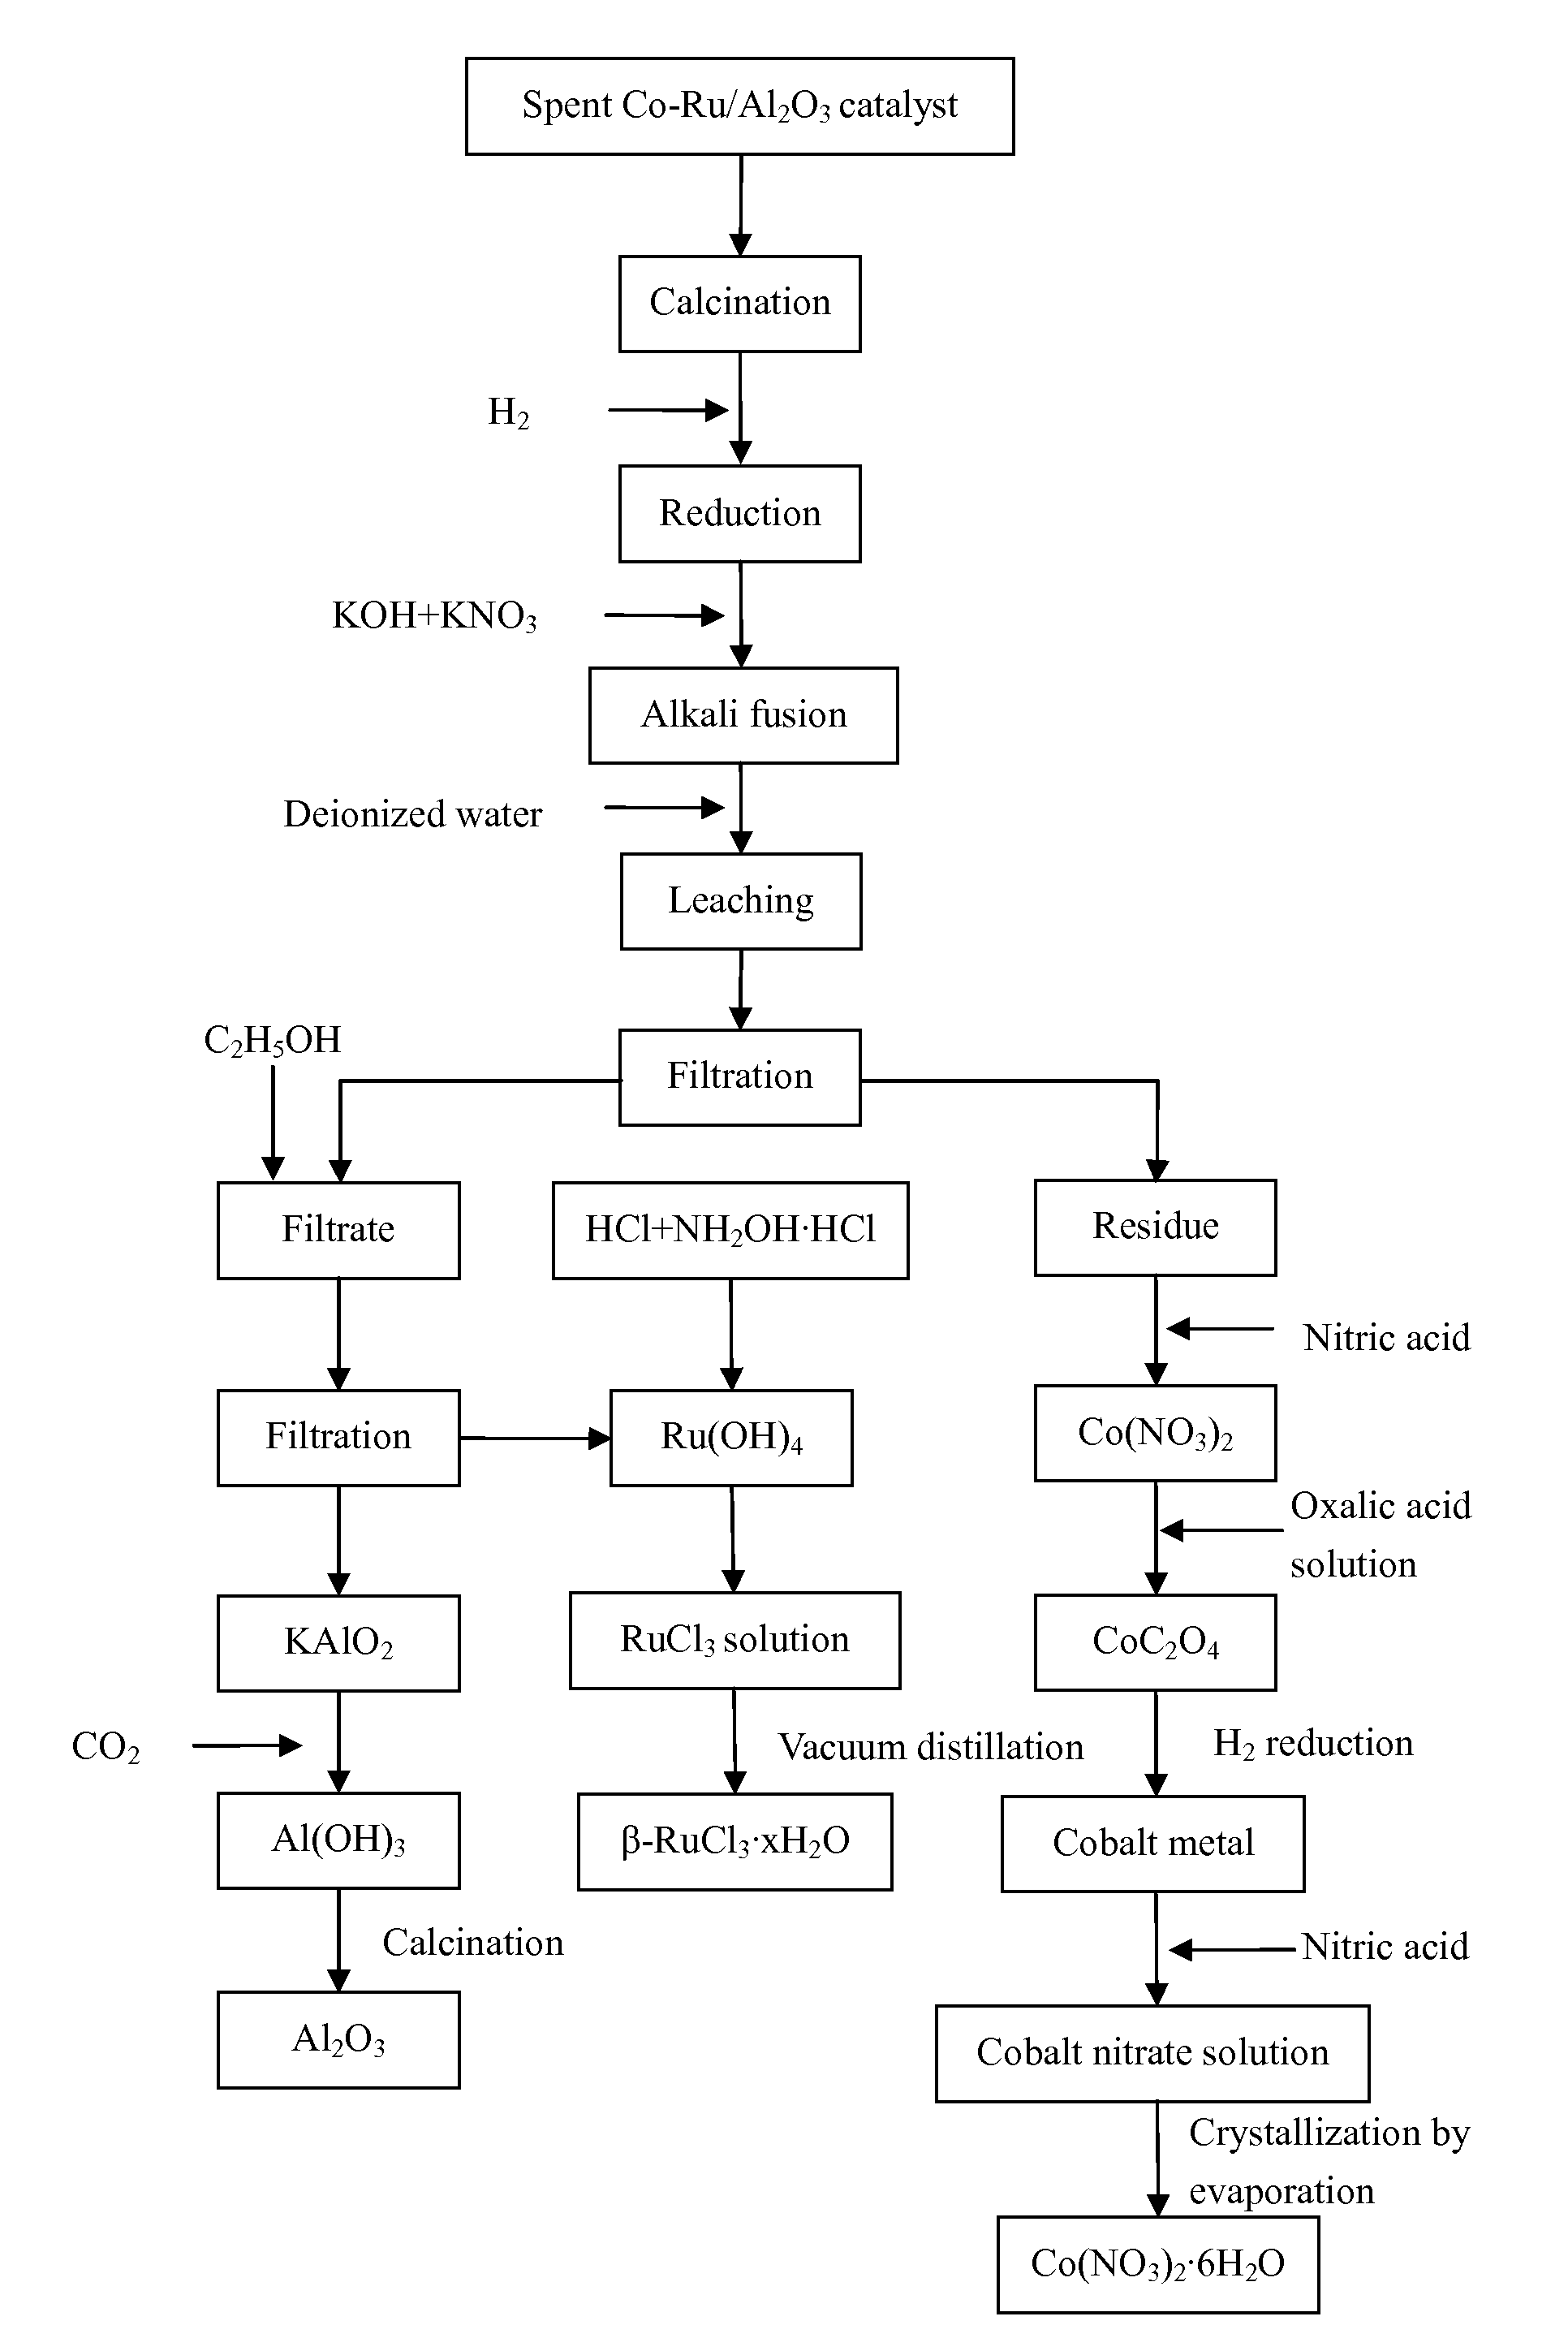 Process for recovery of cobalt, ruthenium, and aluminum from spent catalyst